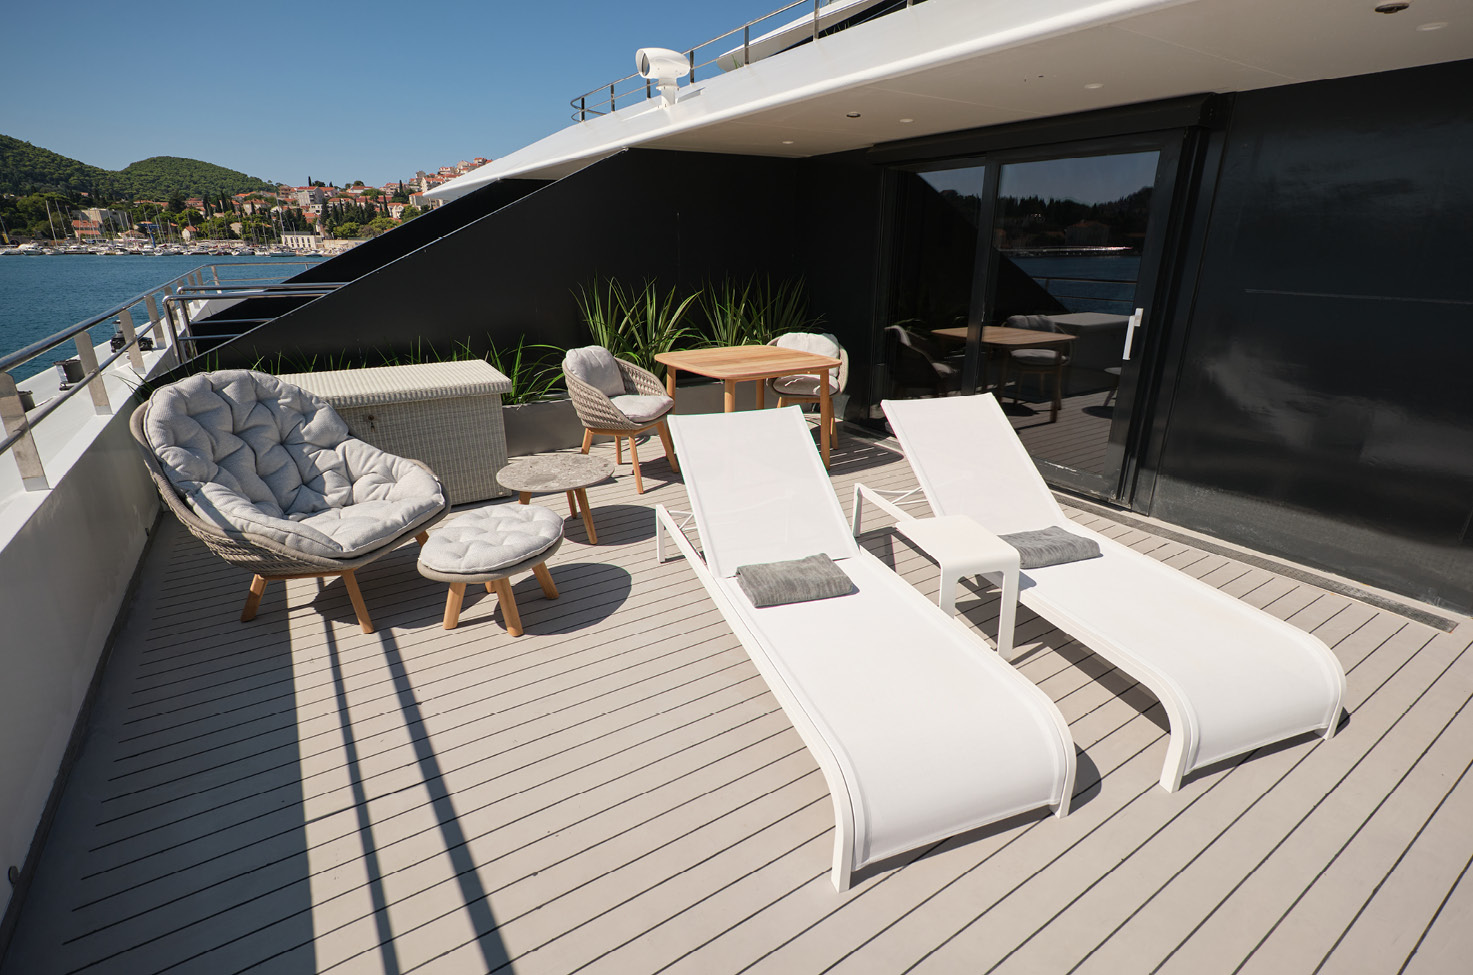 Seating area with a delicious breakfast of fresh coffee and pastries served on the terrace on a luxury Emerald Cruise yacht 